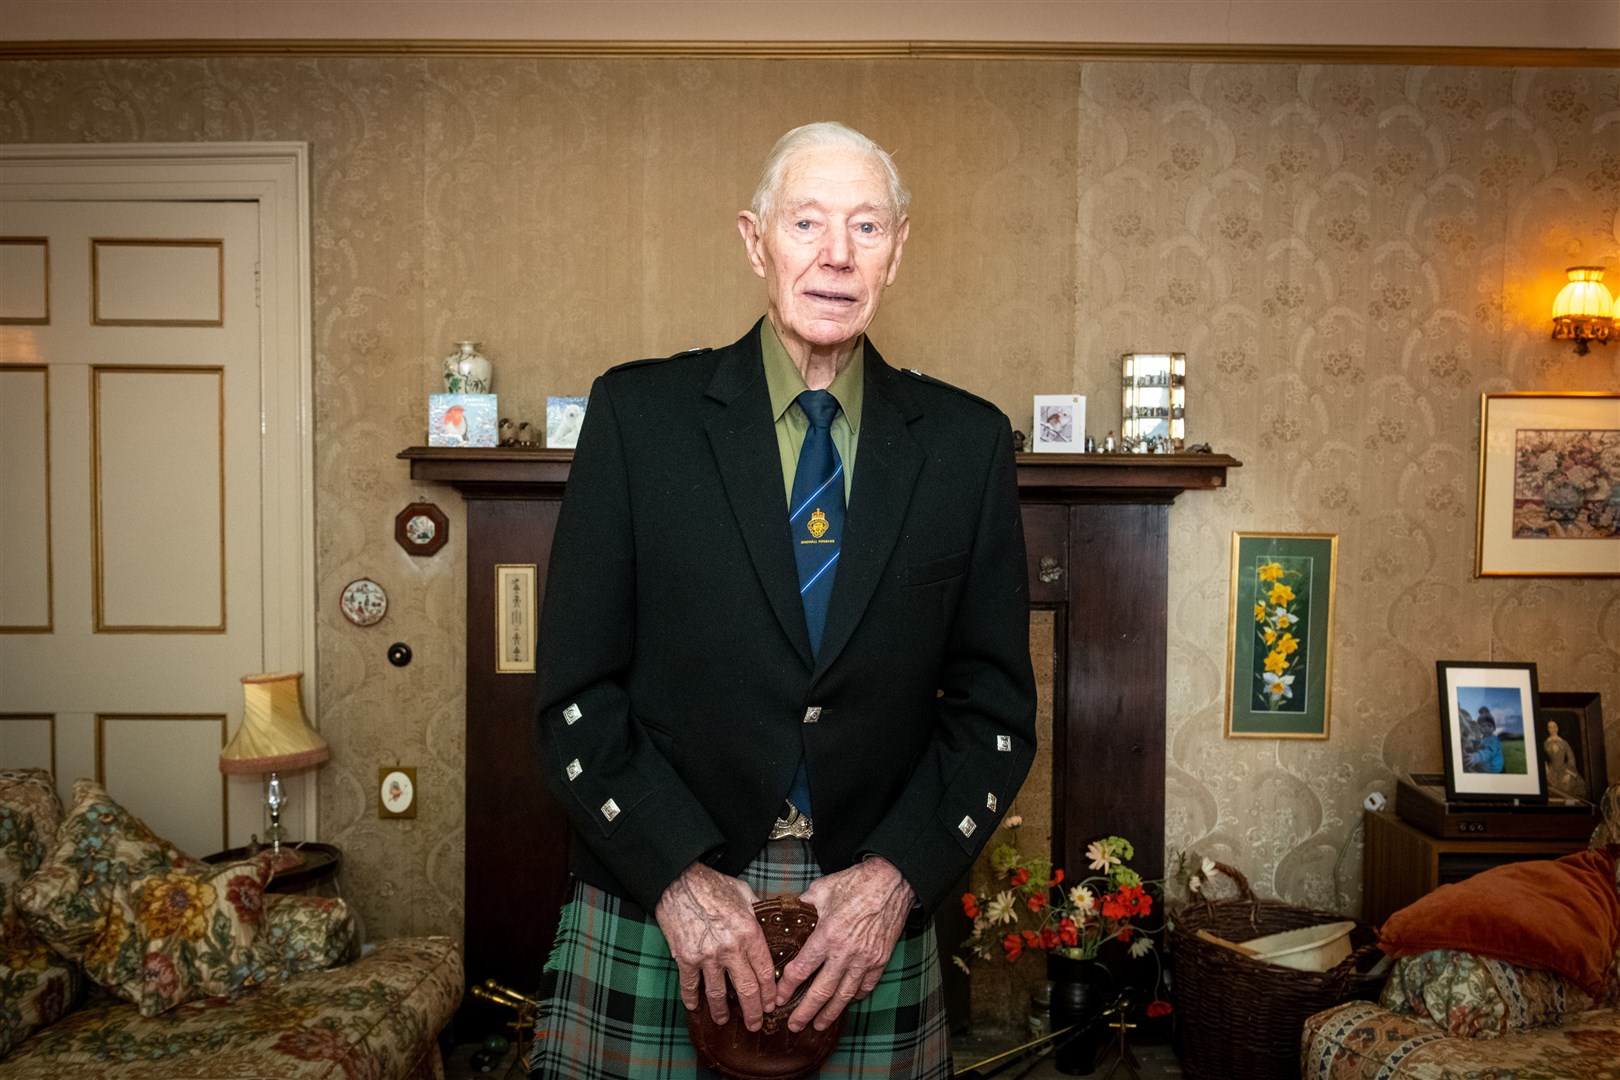 Donald Armstrong, of Dingwall, receives a BEM for services to music and the community in New Year Honours List. Picture: Callum Mackay..